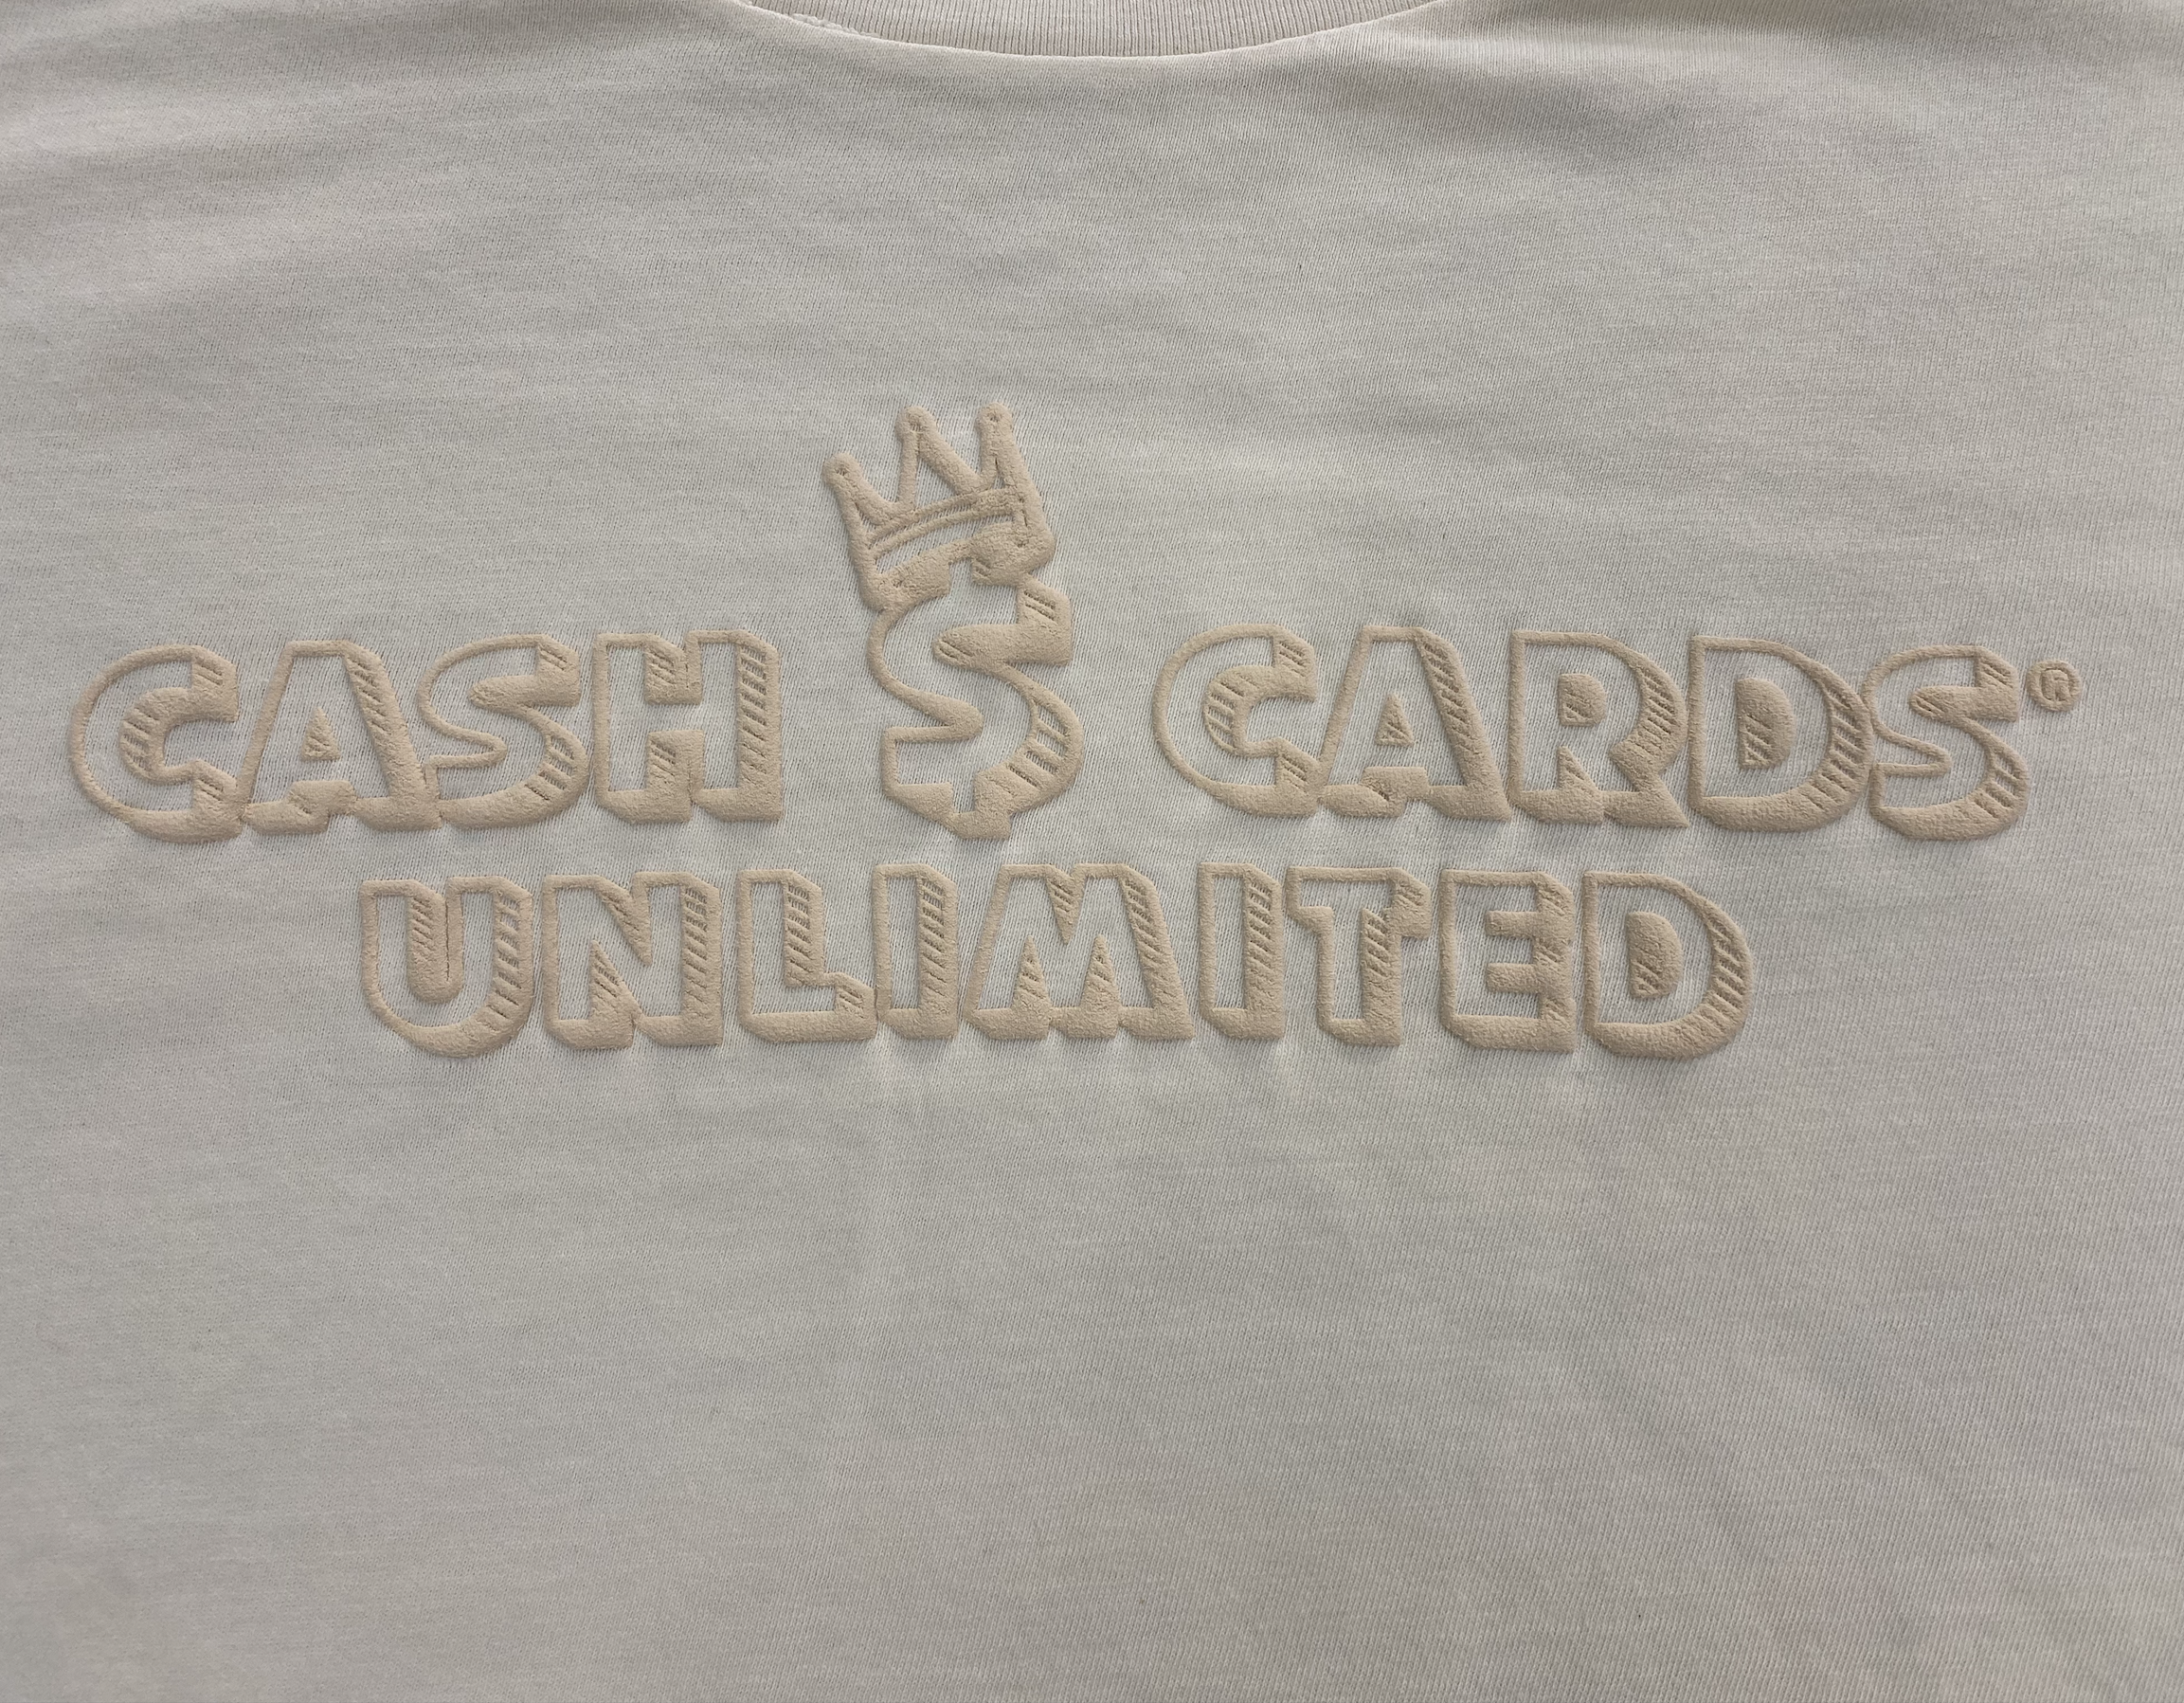 Cash Cards Unlimited Street Wear T-Shirt (Off-White/Large)